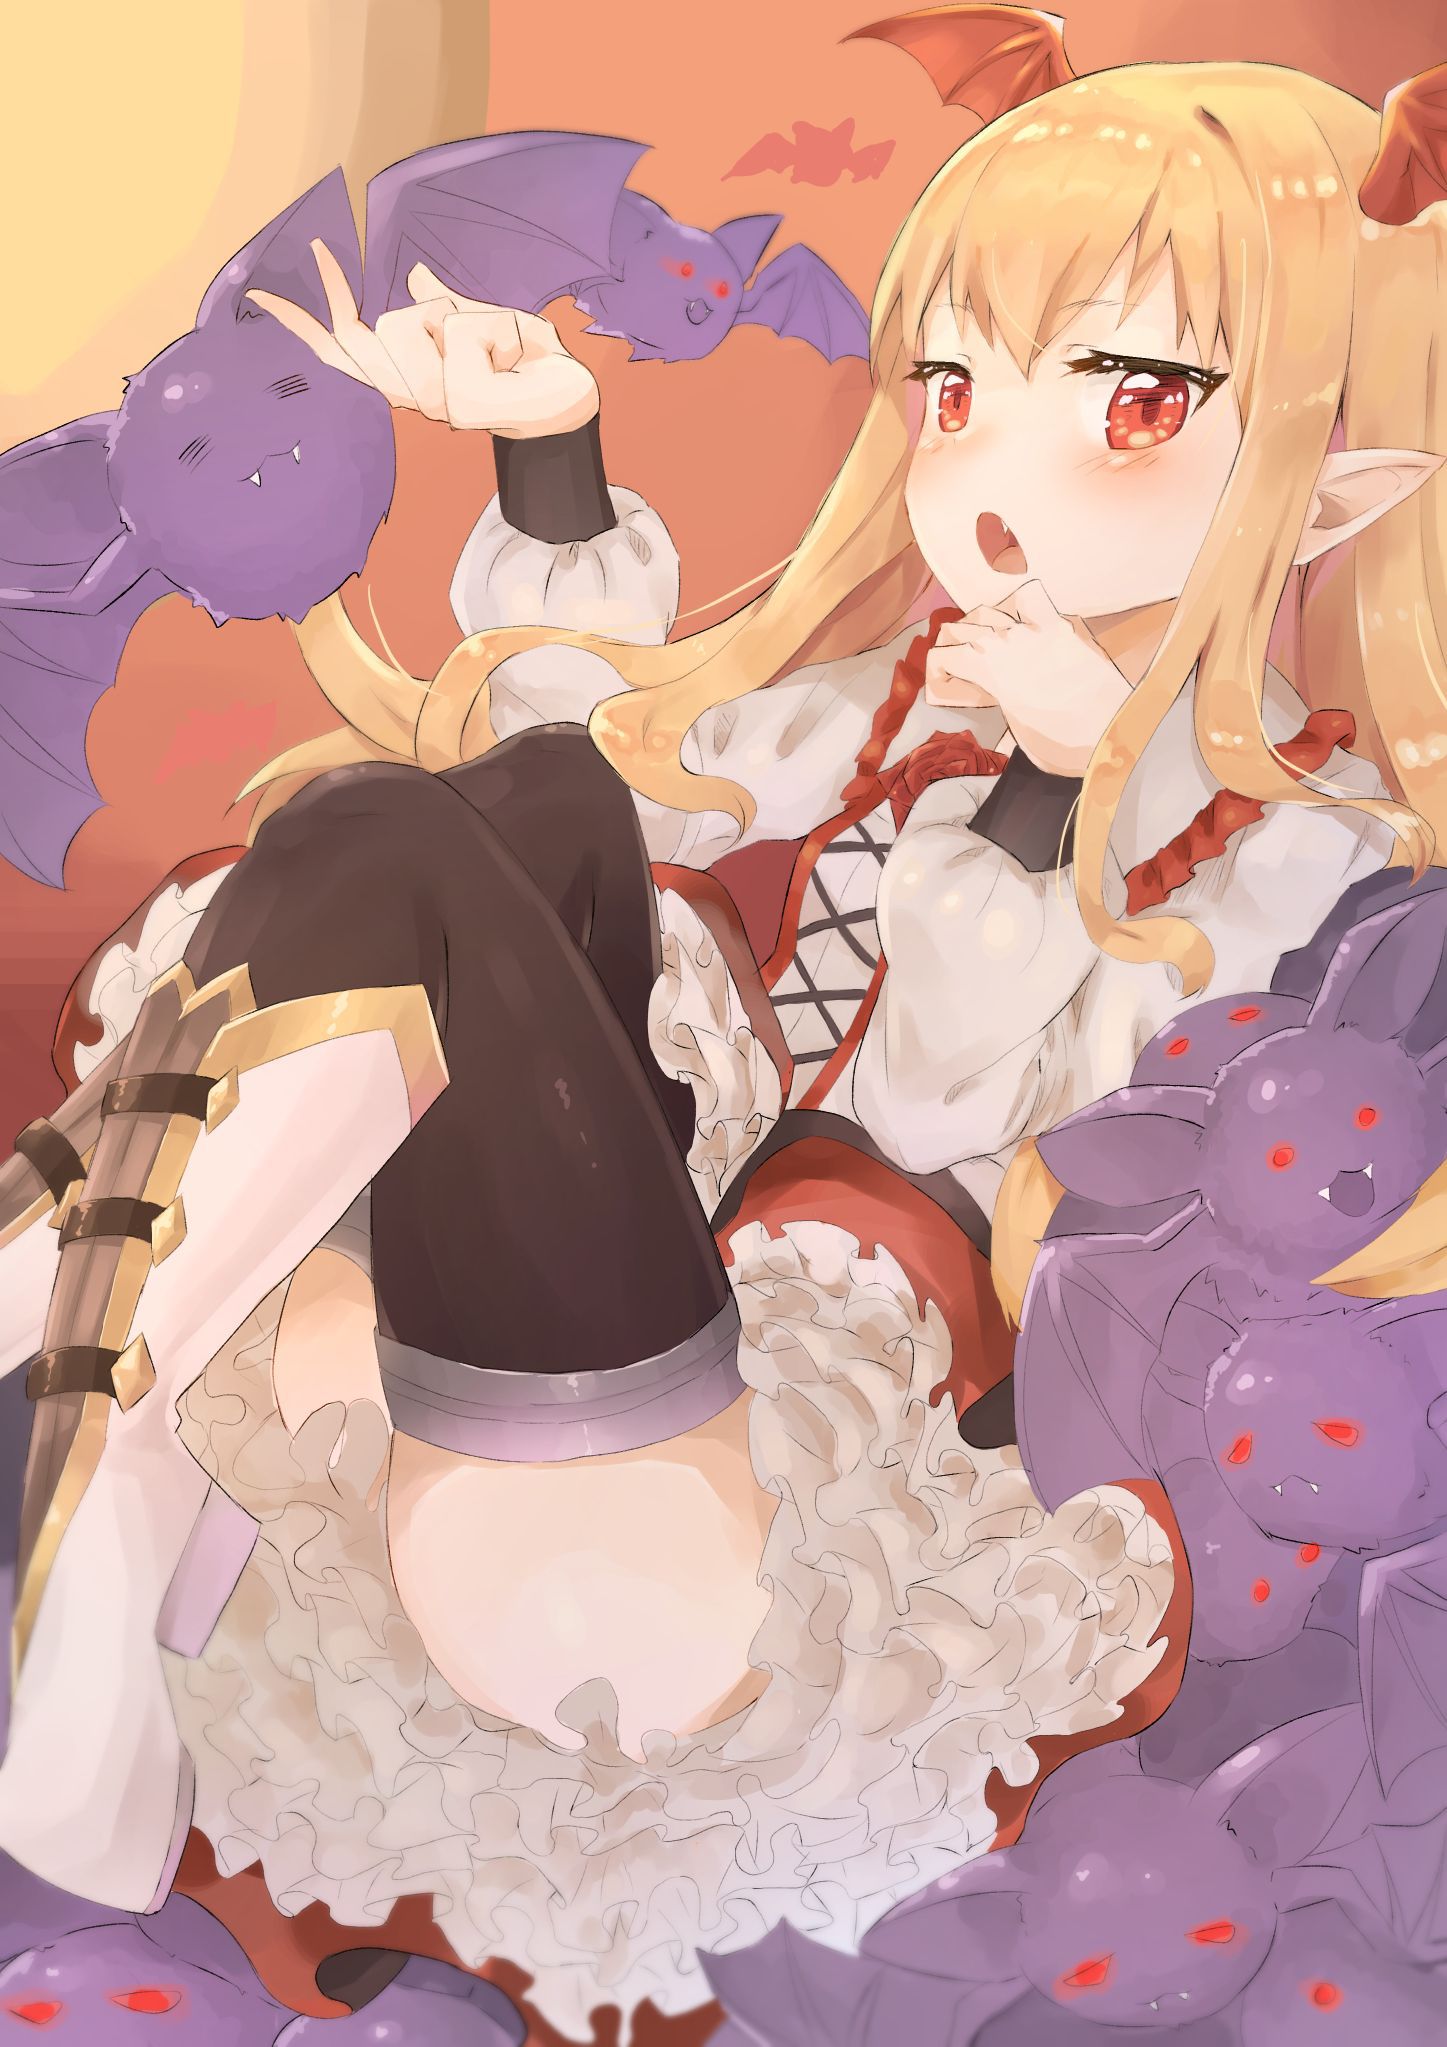 Vampy Chan (secondary-ZIP) to put on the shoes and cute images together "of God bahamut and grumble fantasy." 5